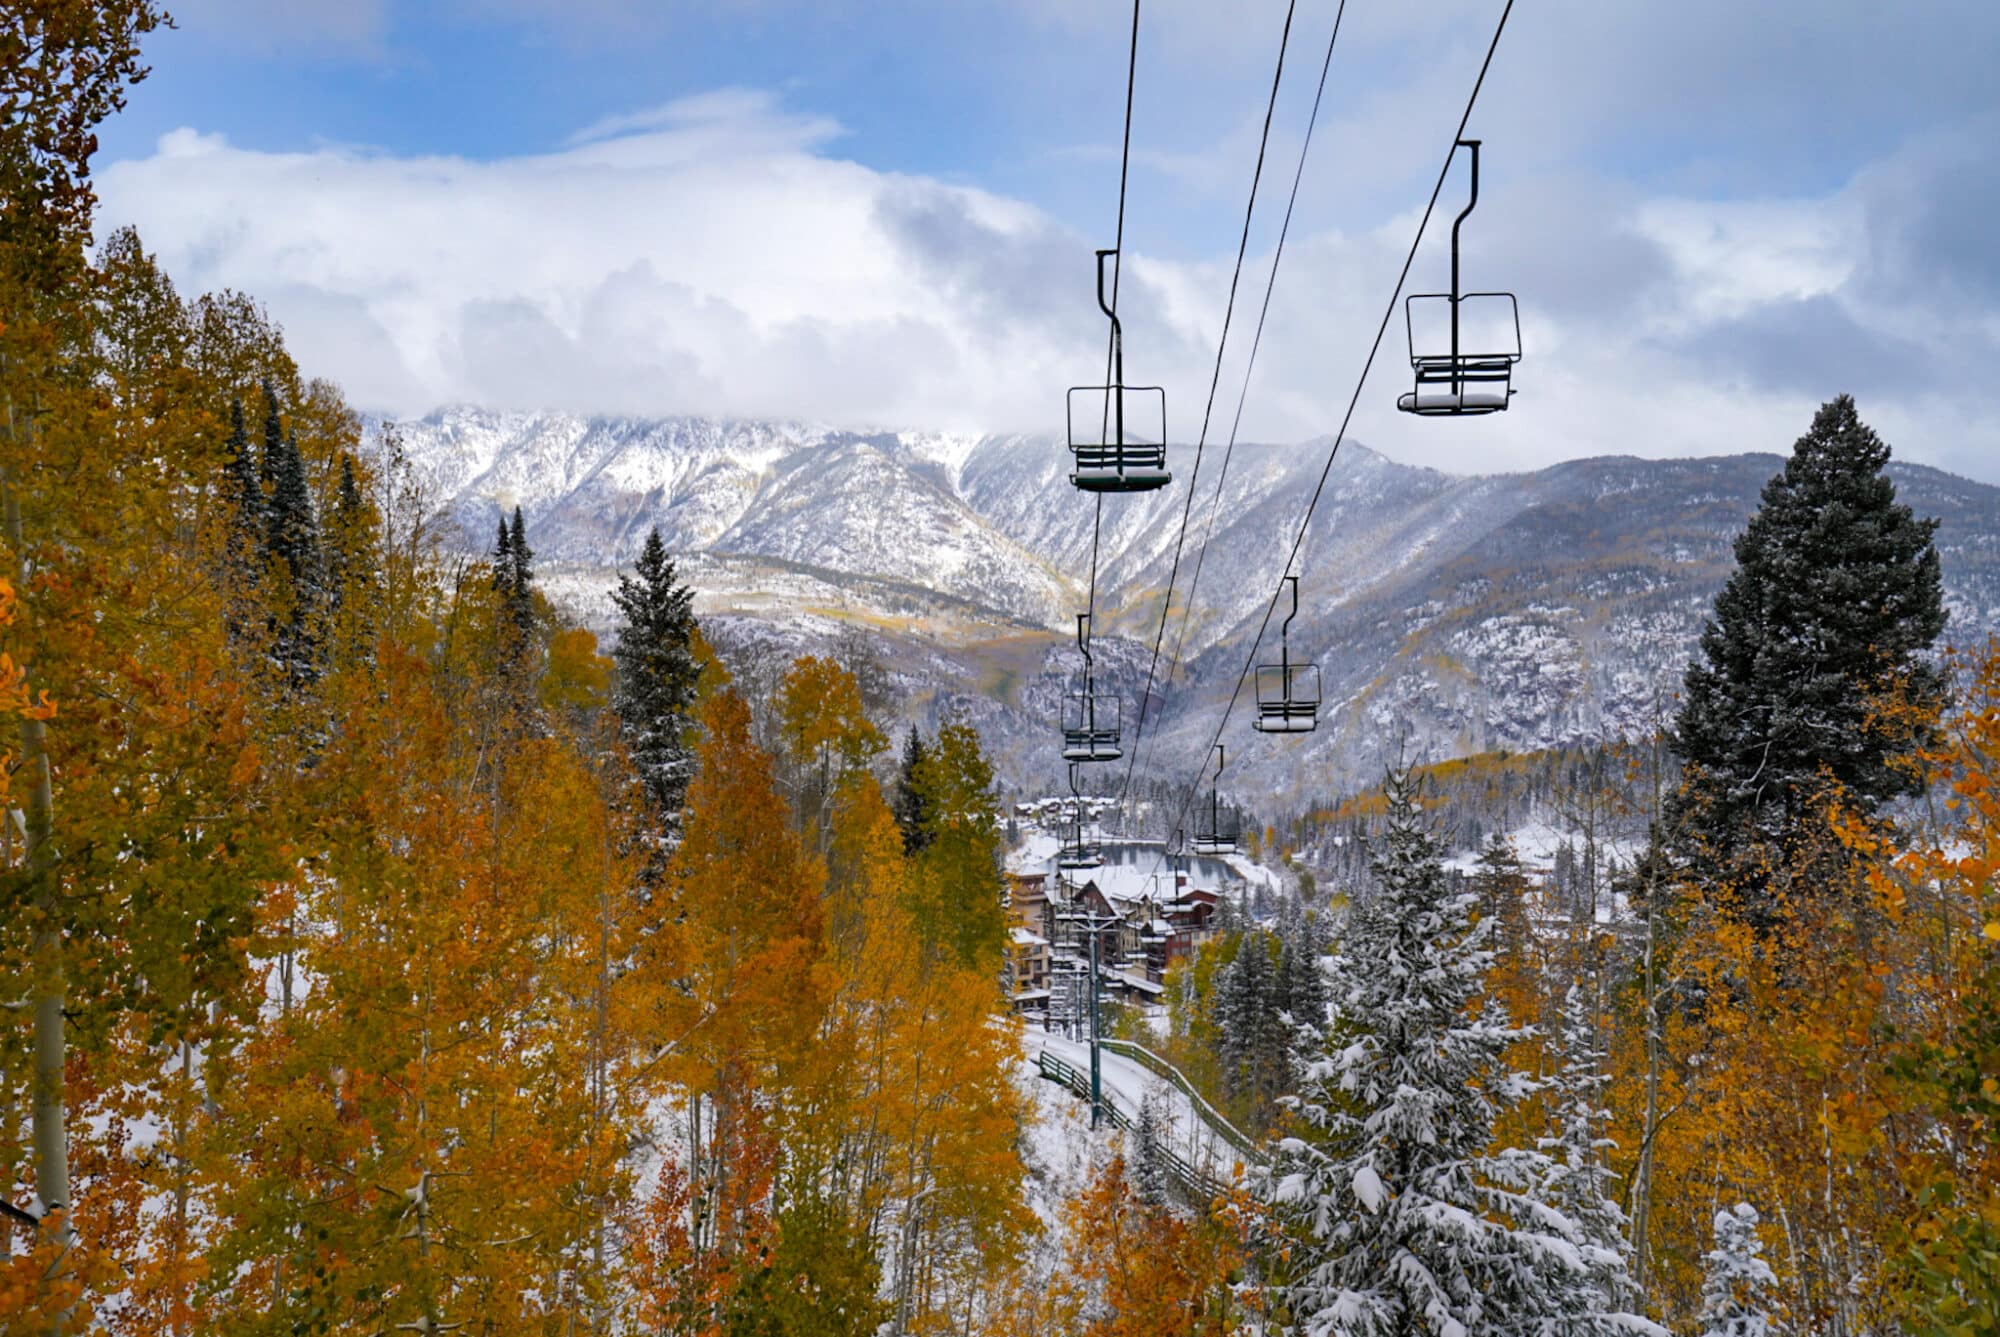 A chair lift looks out over the first snow of the season coating the San Juan mountains and autumn leaves